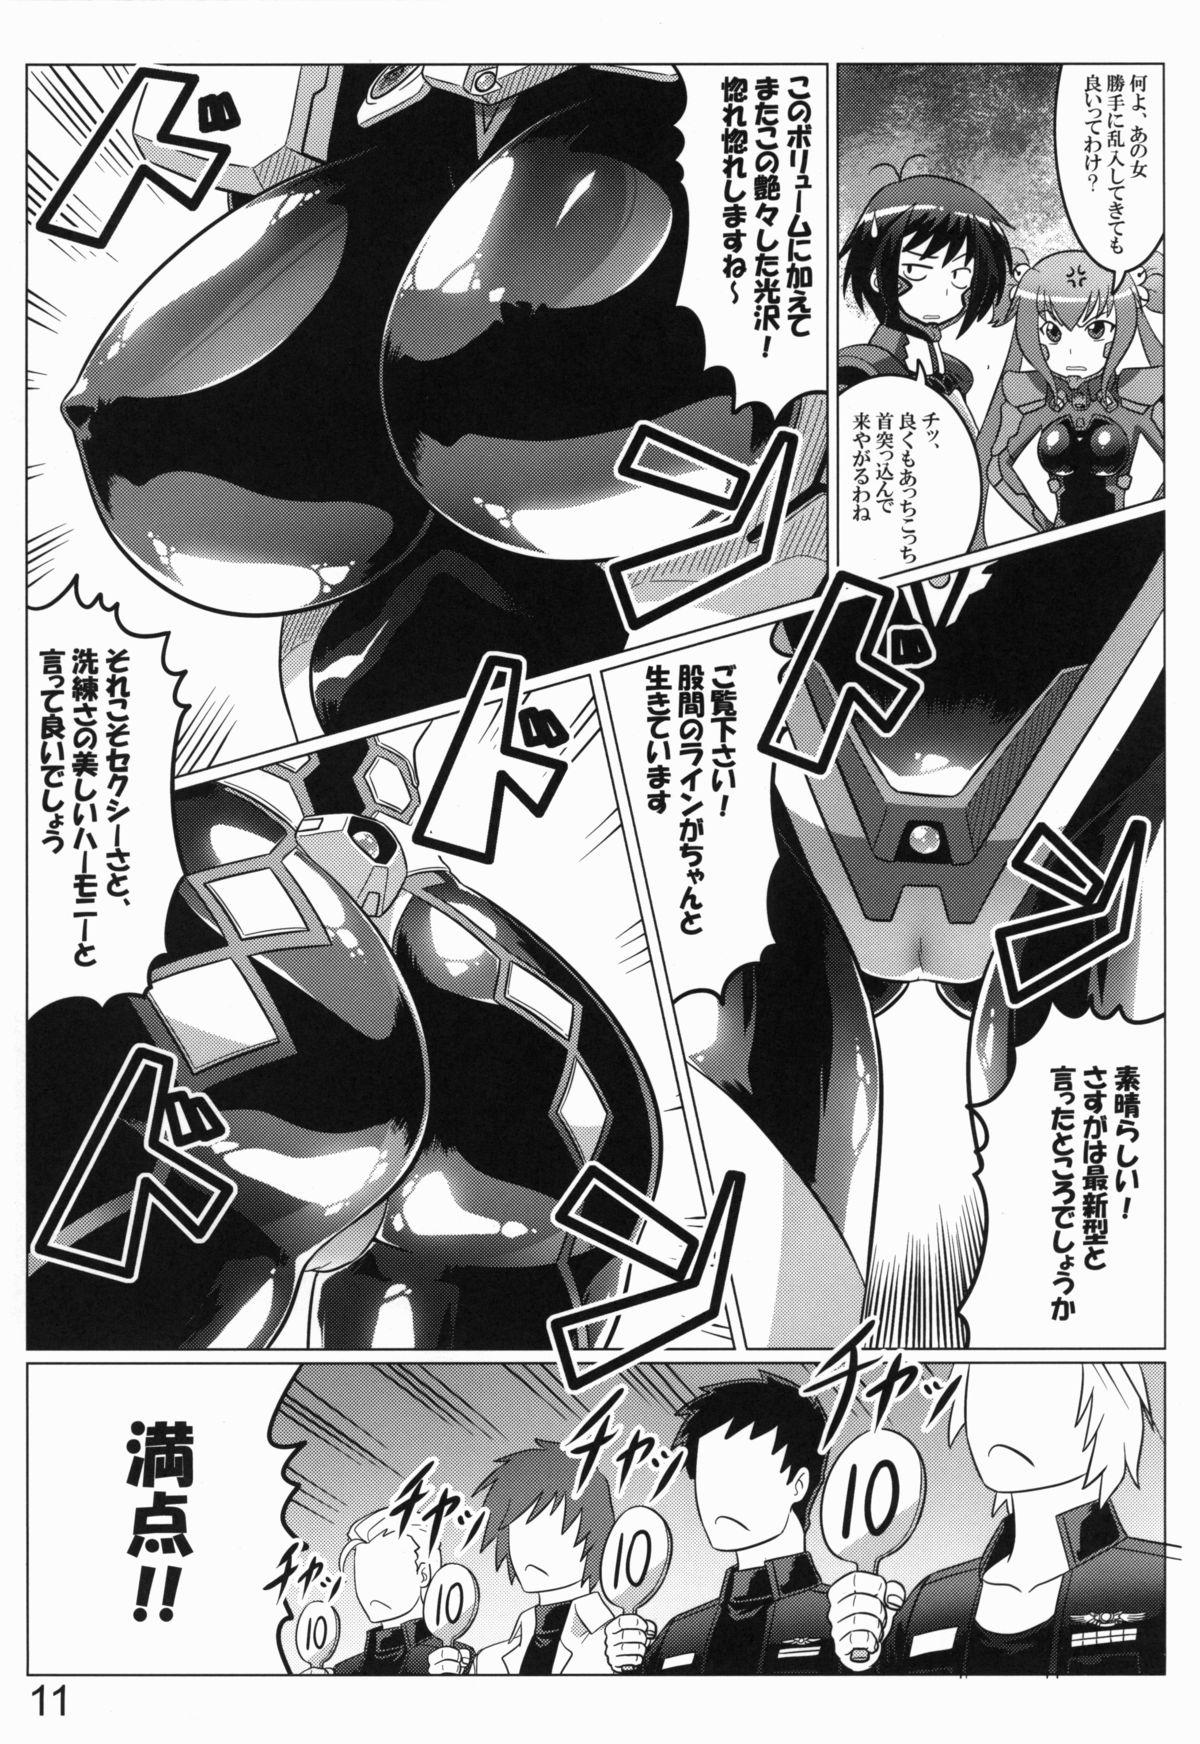 Gapes Gaping Asshole 0-Shiki LOVE - Muv luv alternative total eclipse Gay Doctor - Page 10